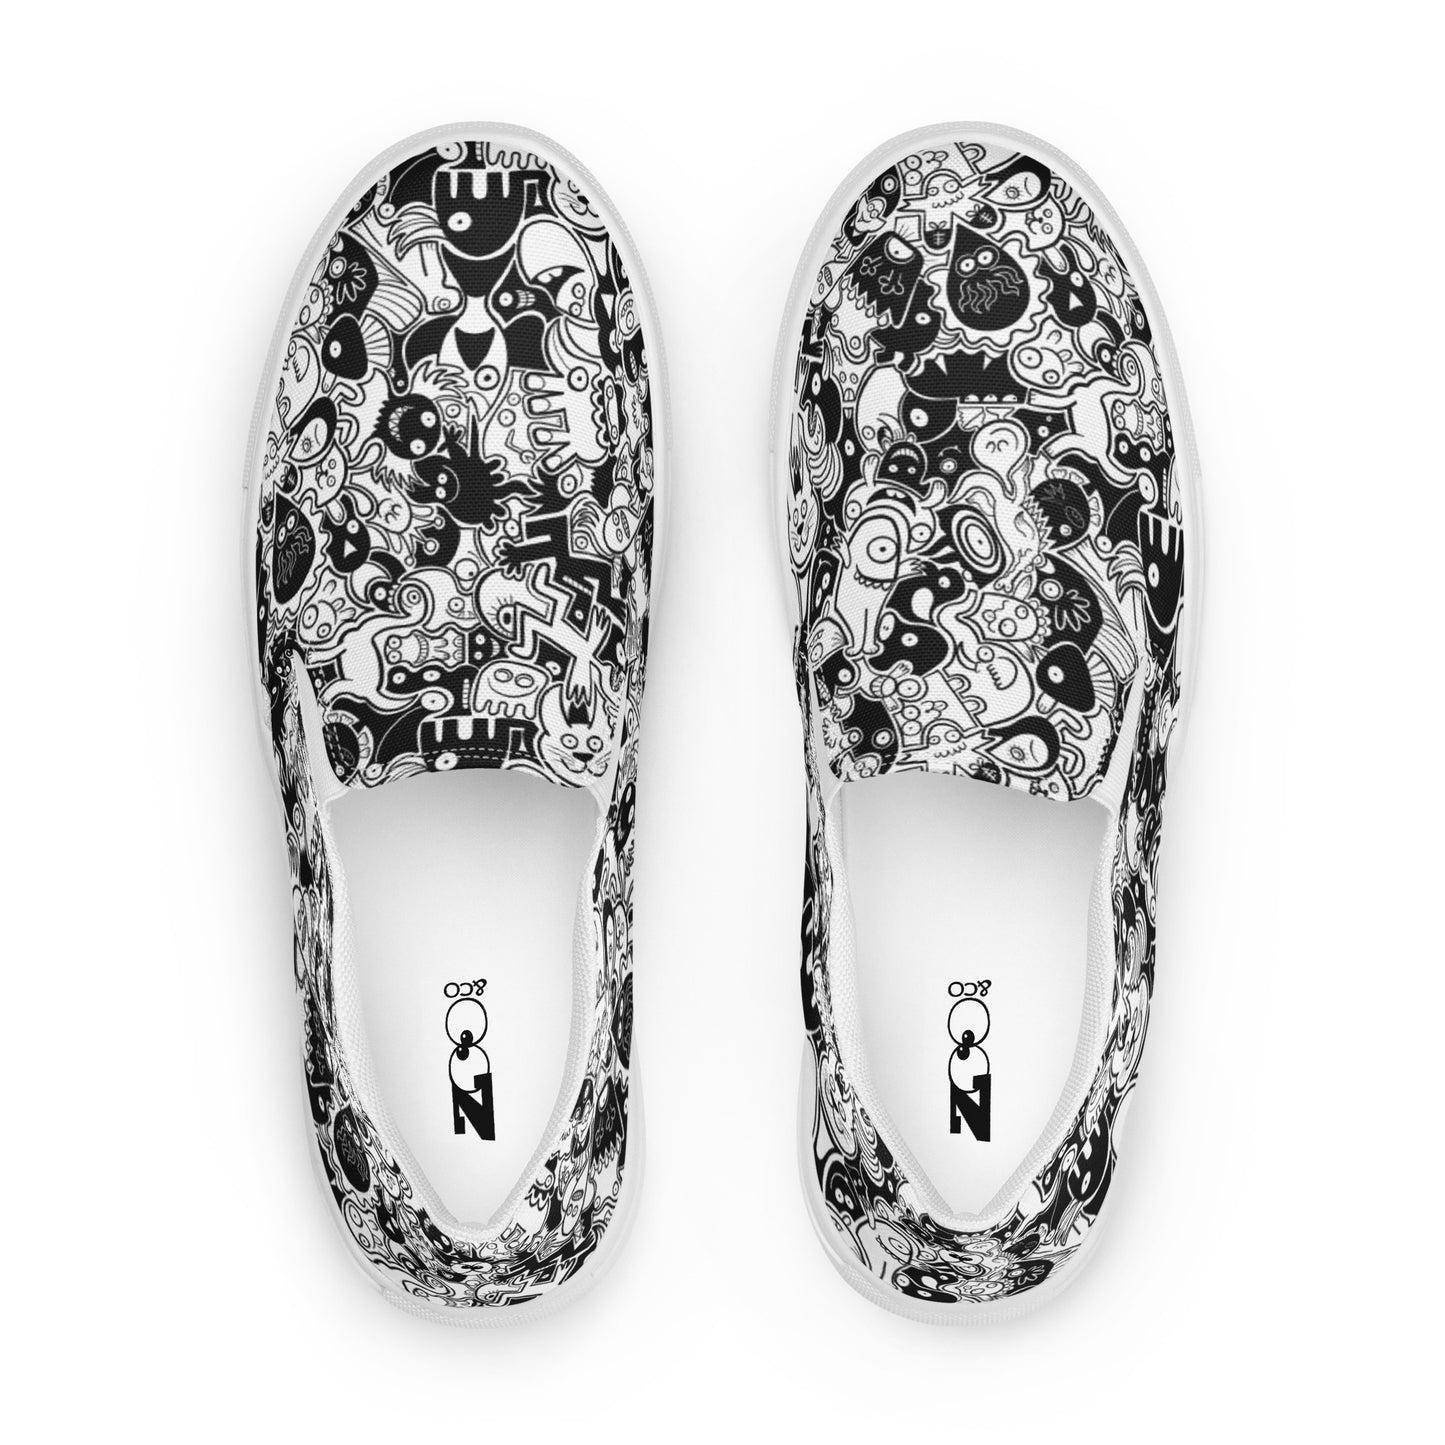 Joyful crowd of black and white doodle creatures Men’s slip-on canvas shoes. Top view